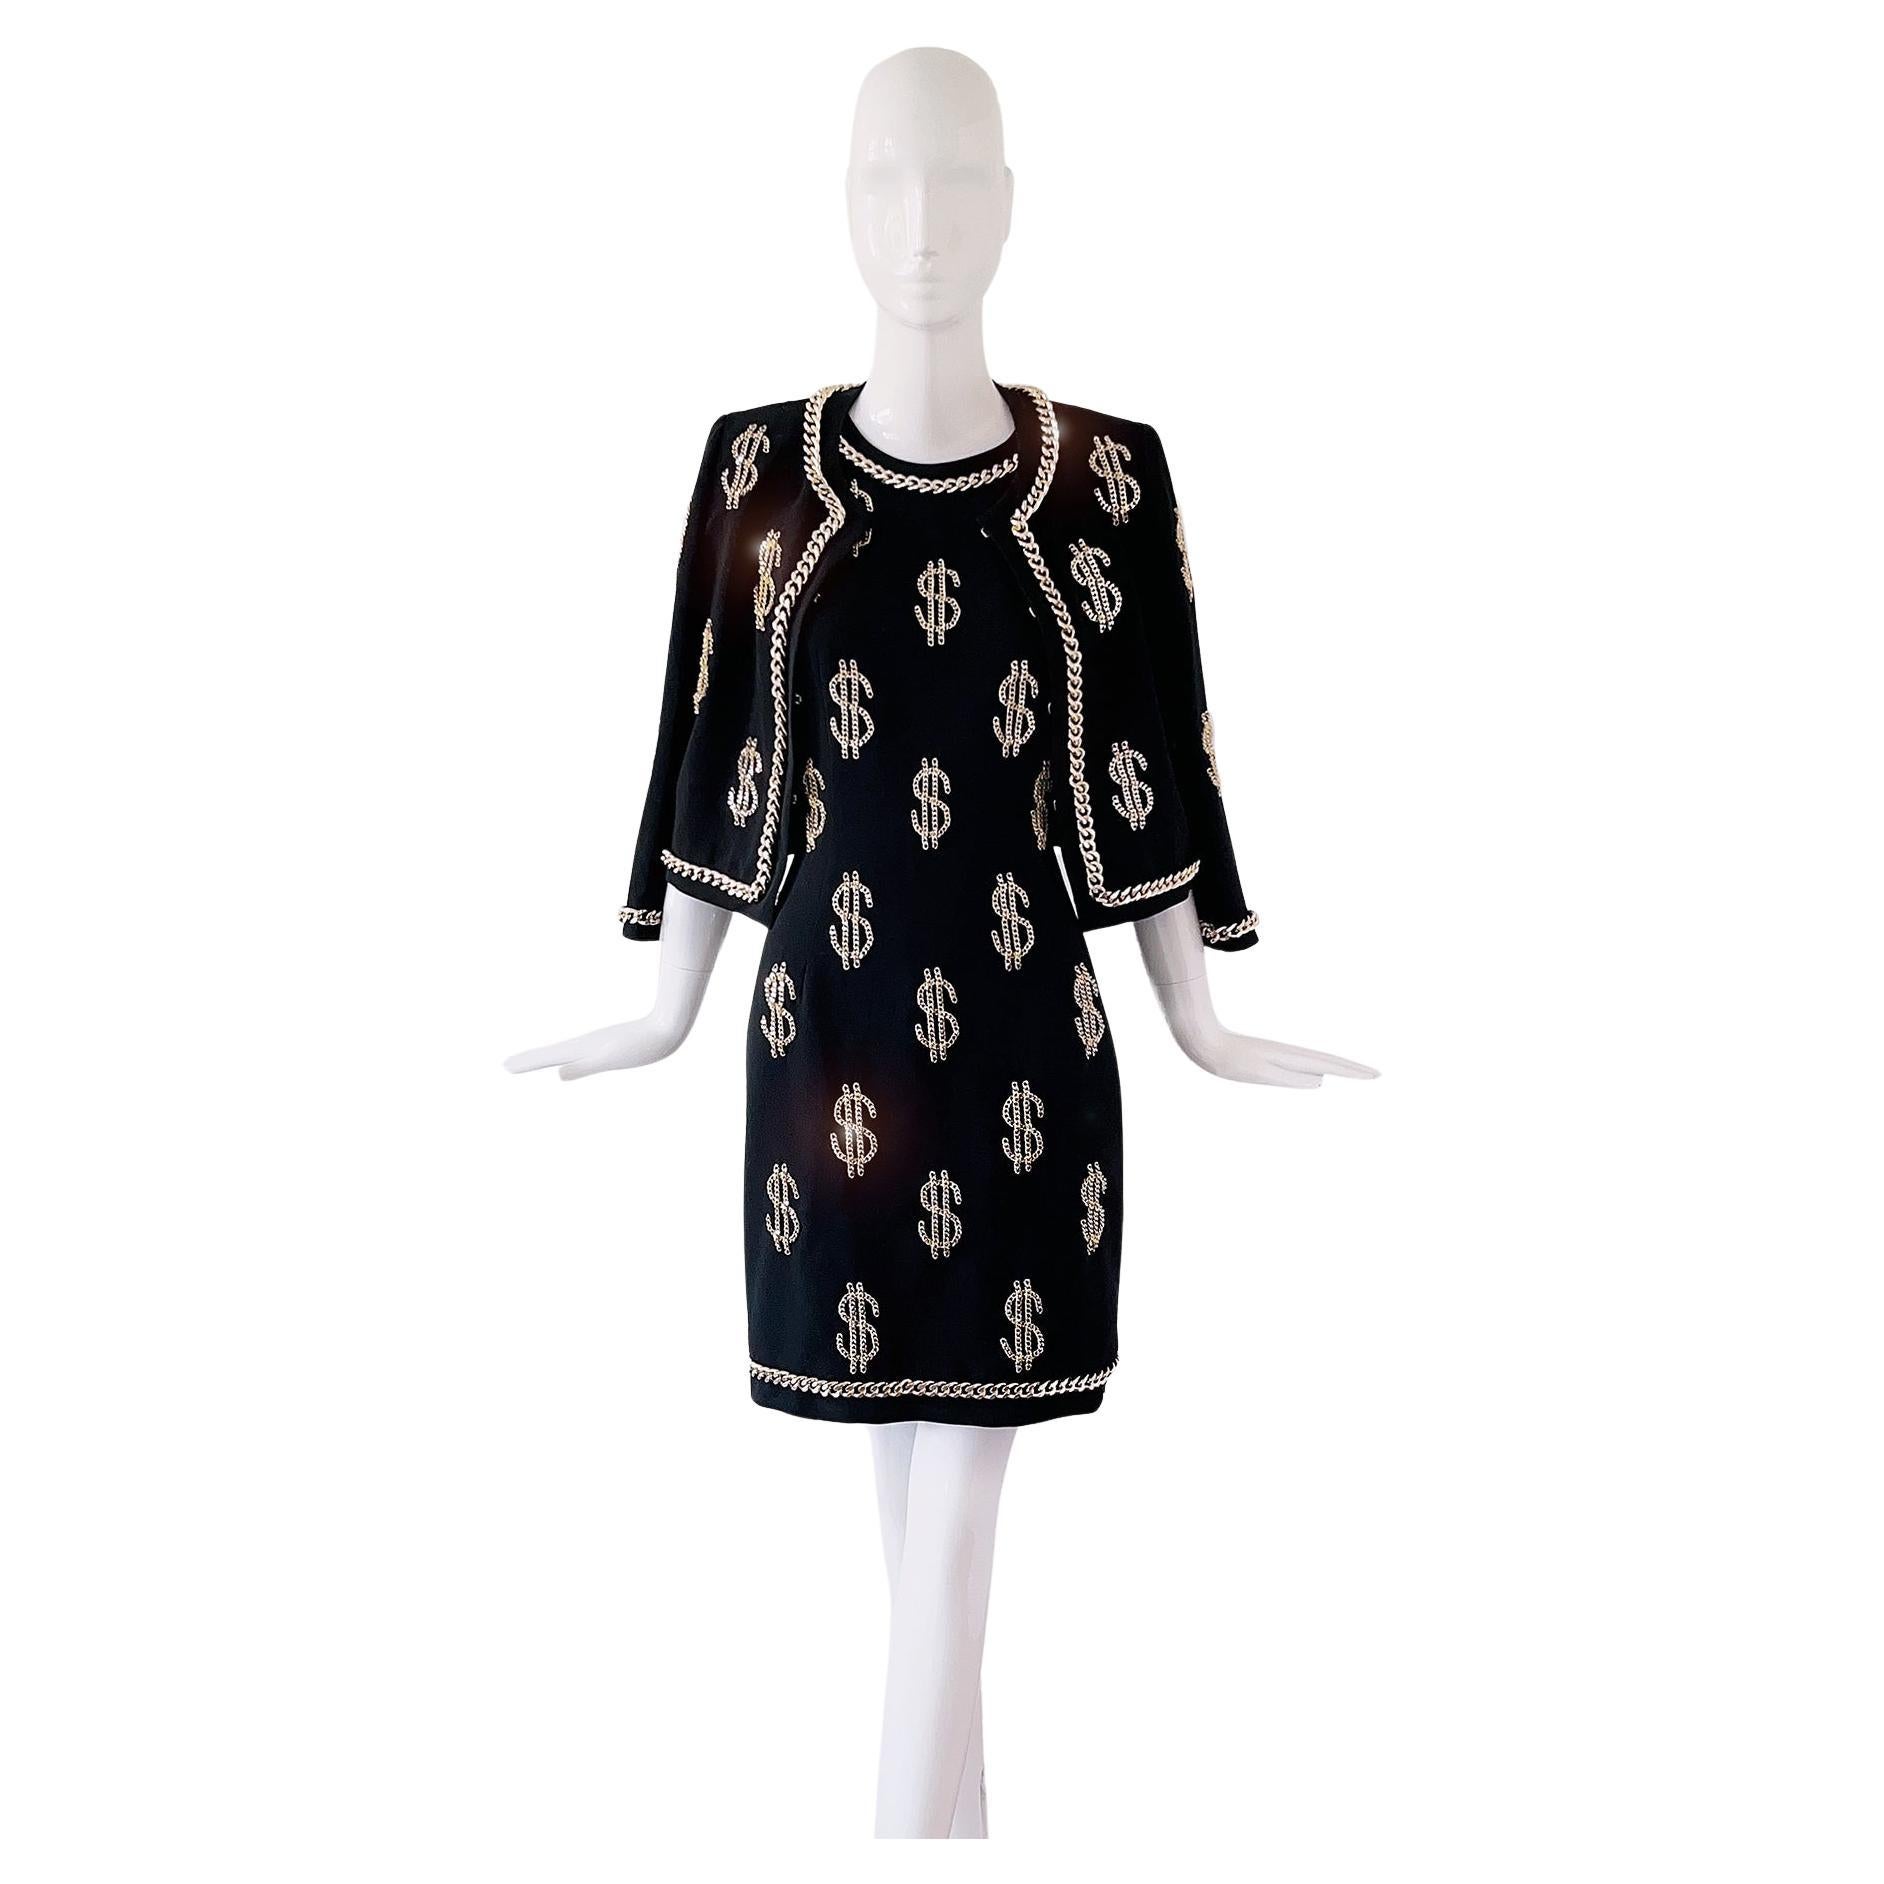 Iconique MOSCHINO Couture Dollar Sign Ensembe Black Dress Jacket Gold Chain Set 